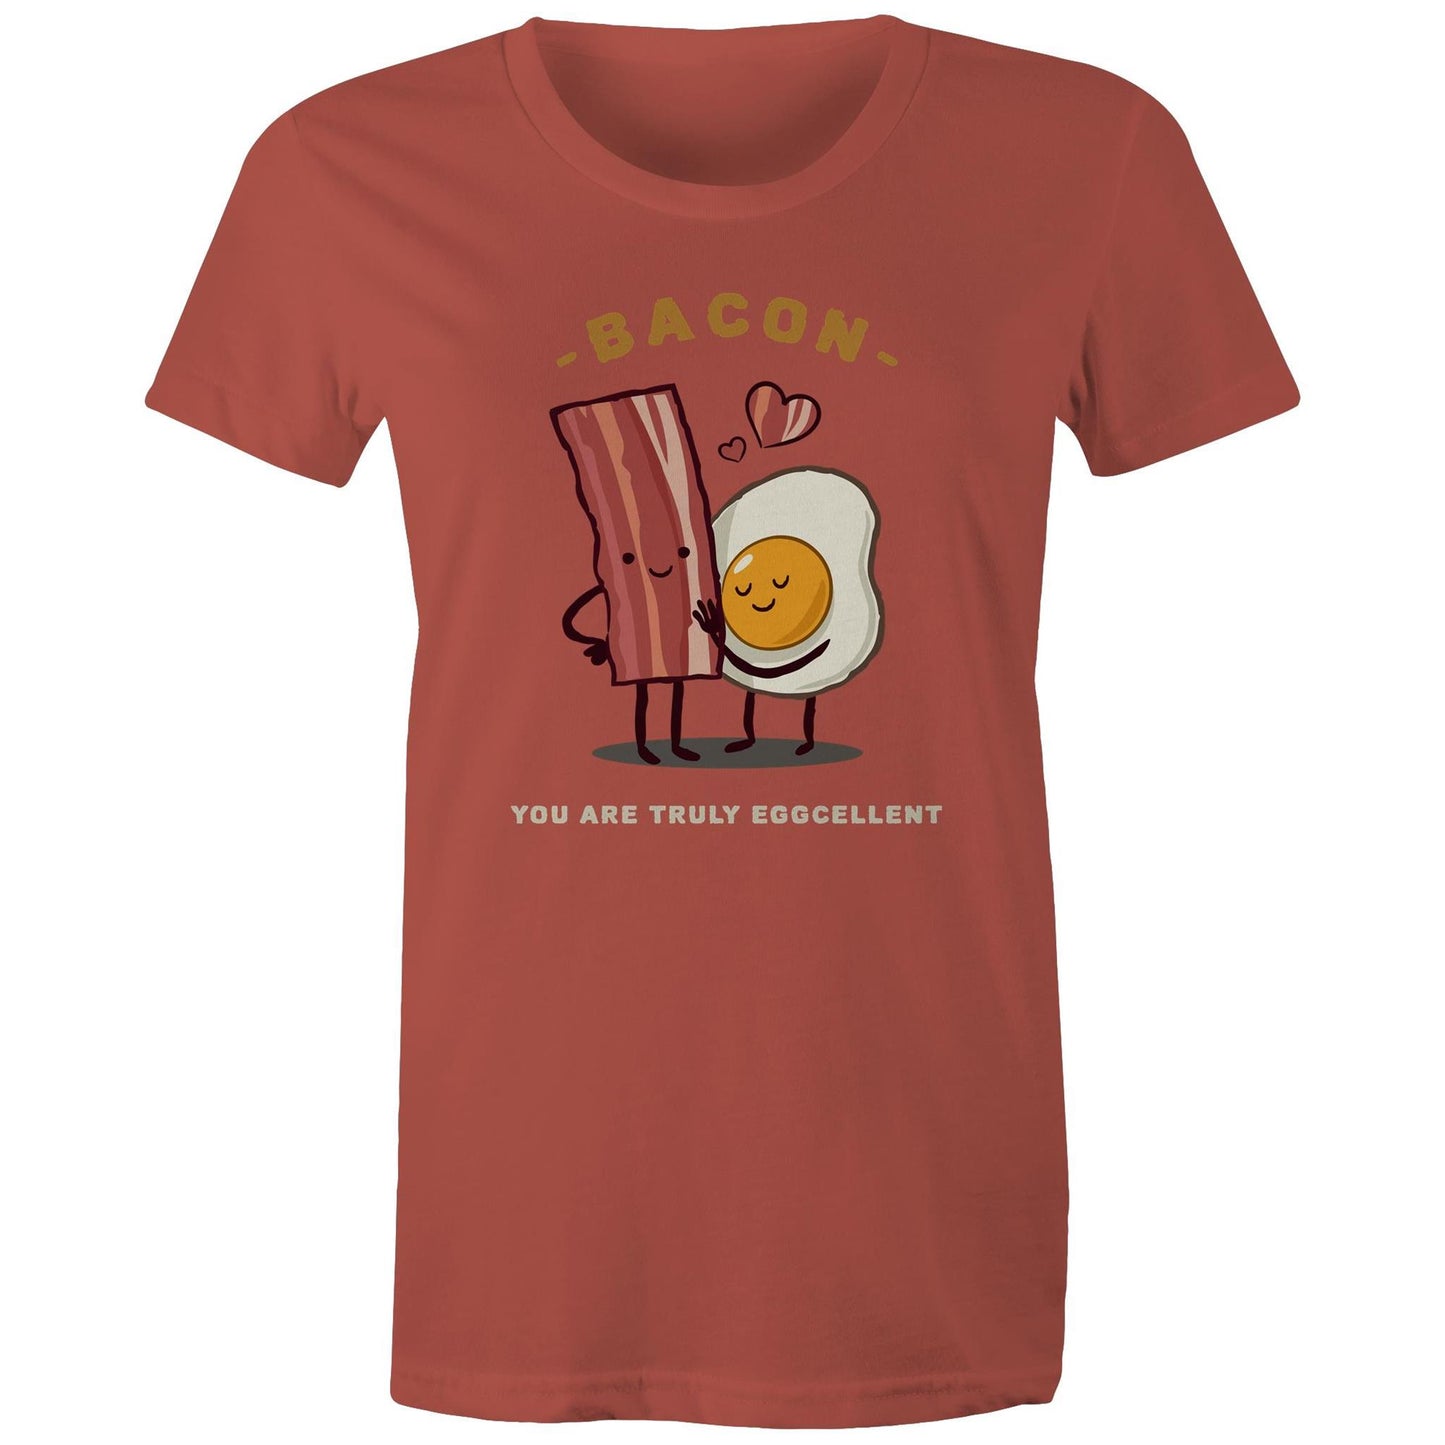 Bacon, You Are Truly Eggcellent - Womens T-shirt Coral Womens T-shirt Food